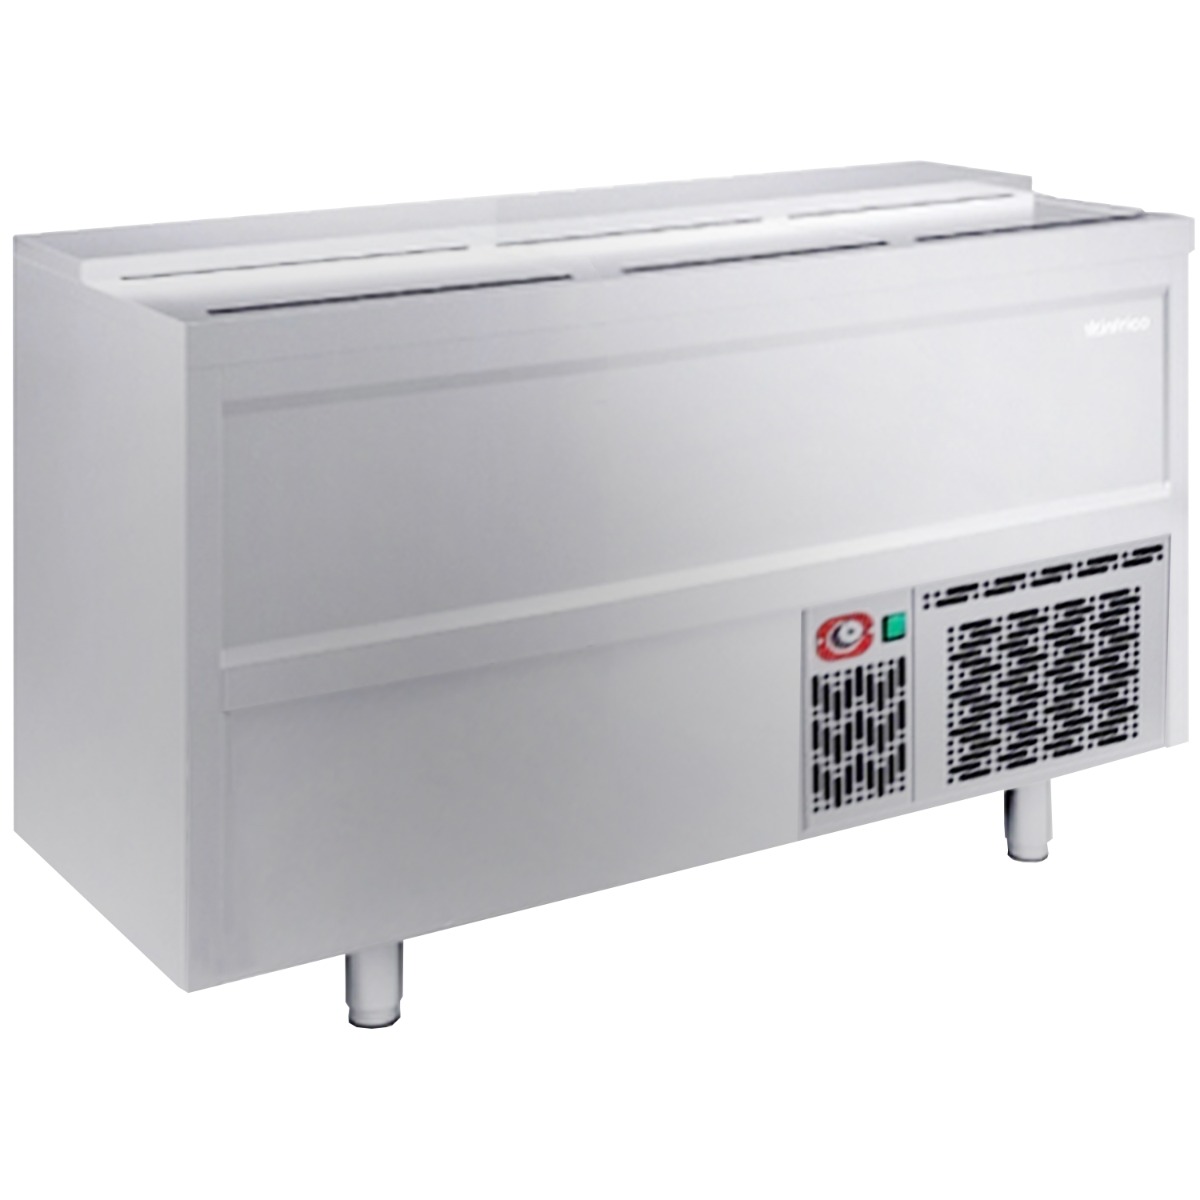 INFRICO Stainless Steel Beer Dump 445L - EB1500